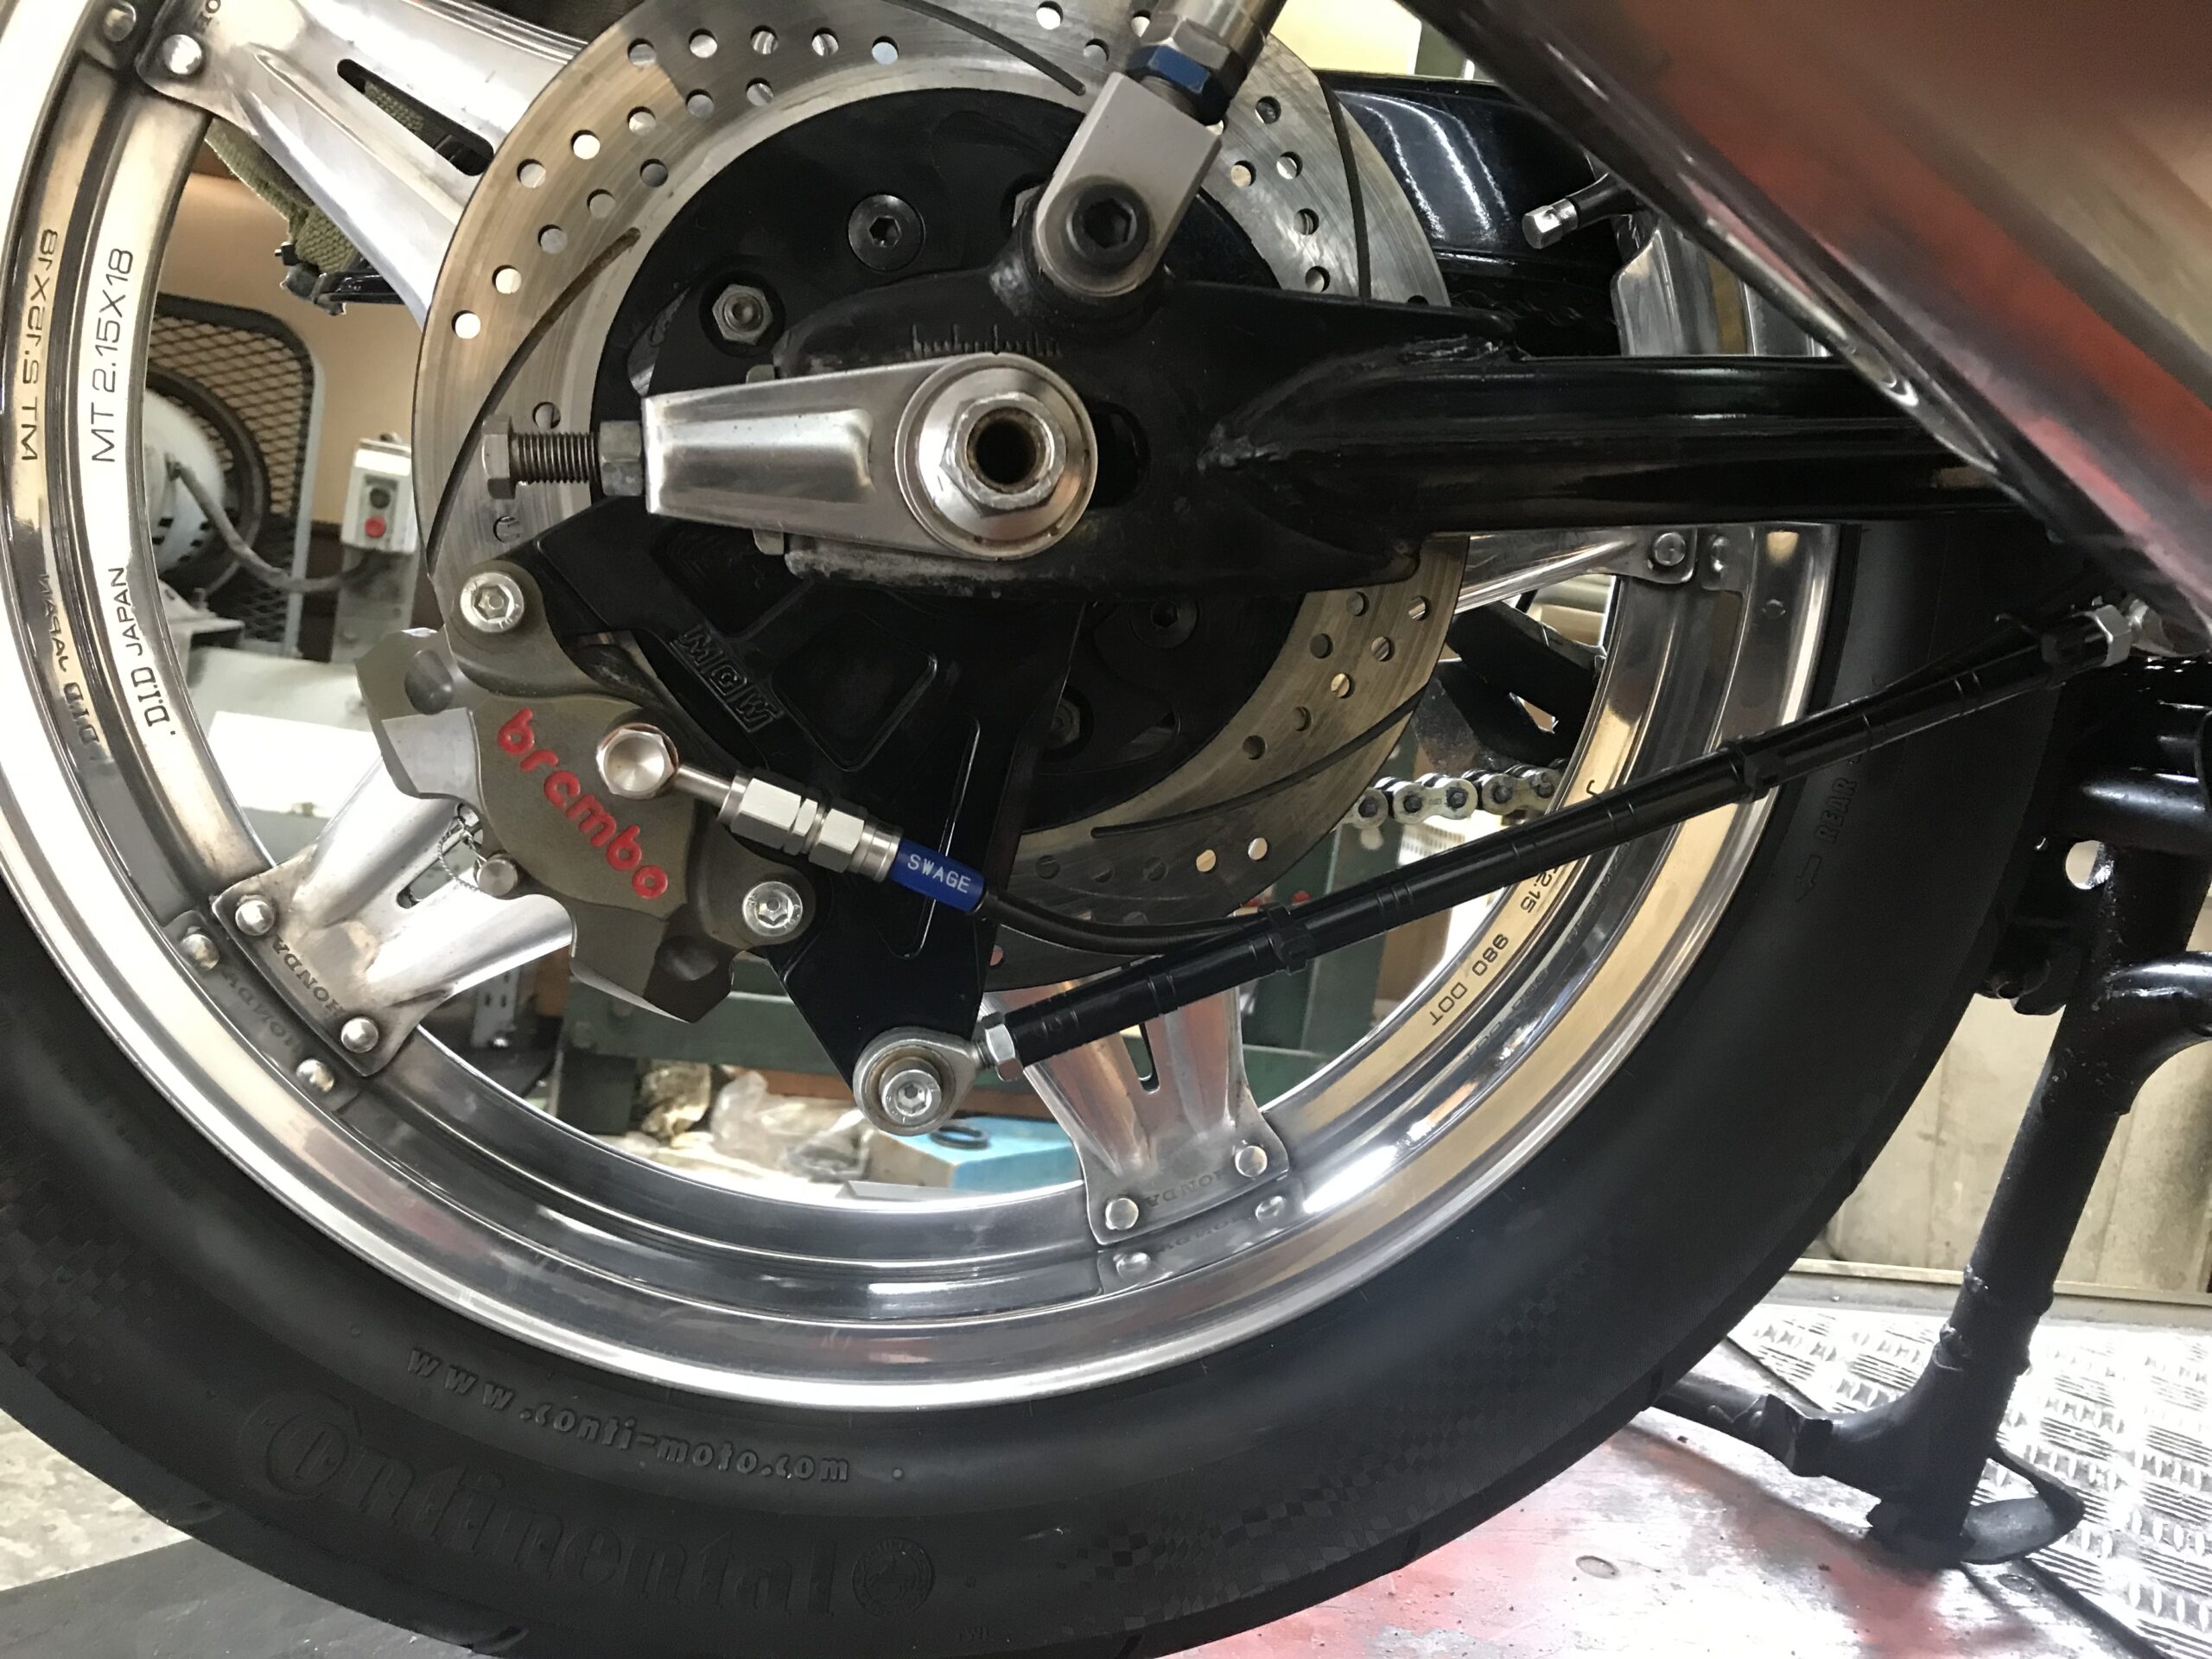 HONDACBX1000 - Route to torque rod